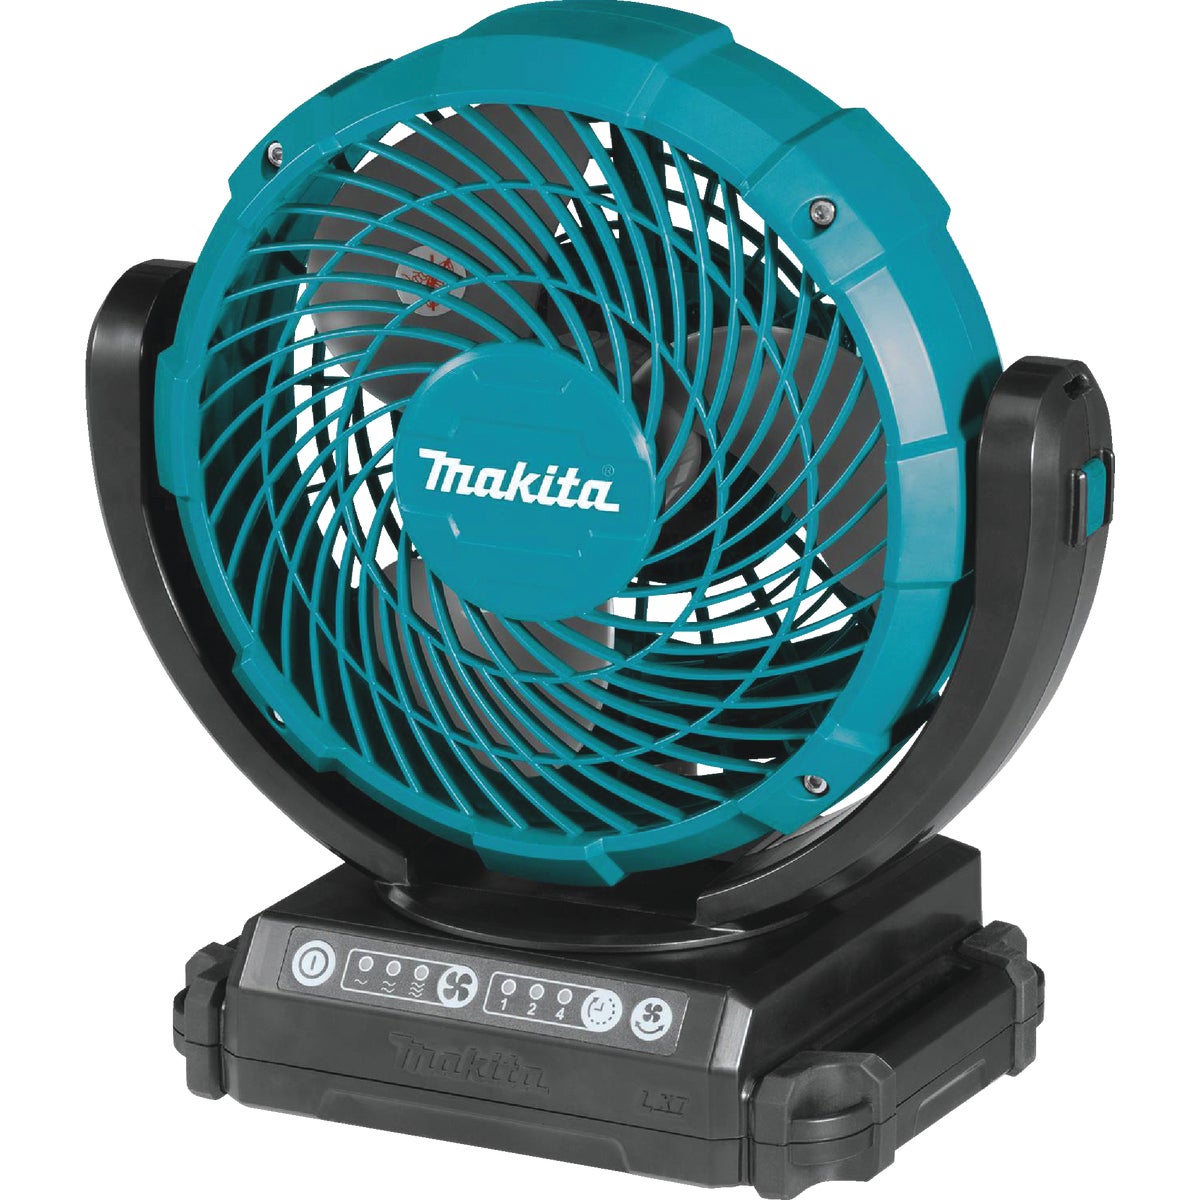 Makita 18 Volt LXT Lithium-Ion 7-1/8 In. Cordless Jobsite Fan (Tool Only)